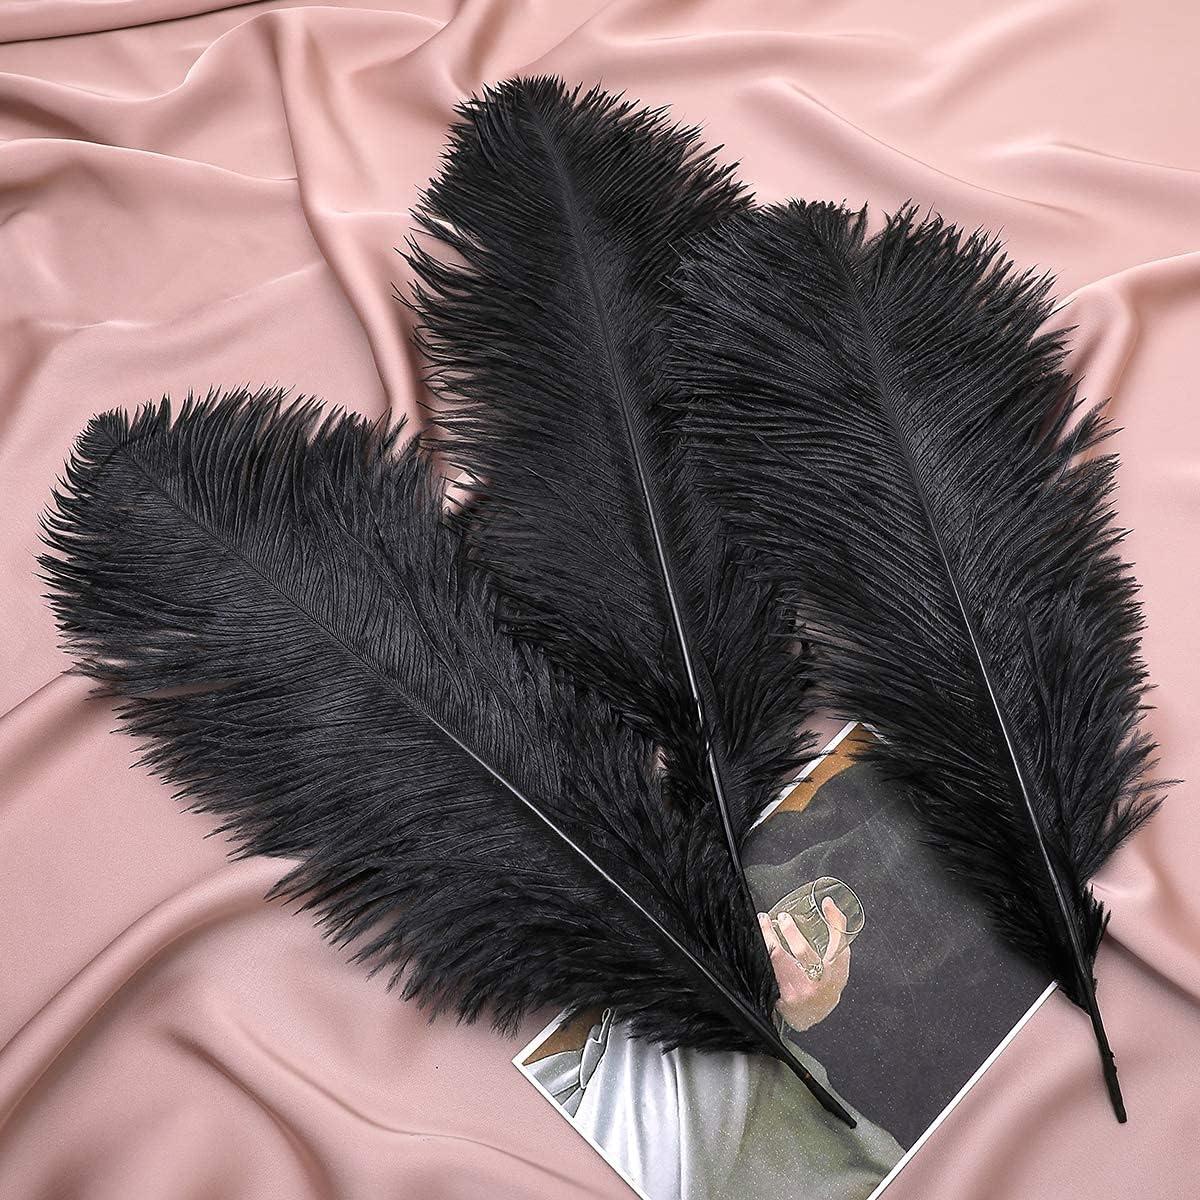 Topshopicks Pack of 24 Natural Black Ostrich Feathers Bulk 10-12 Inches  with 24 Sticks of 10 Inch and Tape for DIY Decorations, Wedding Party